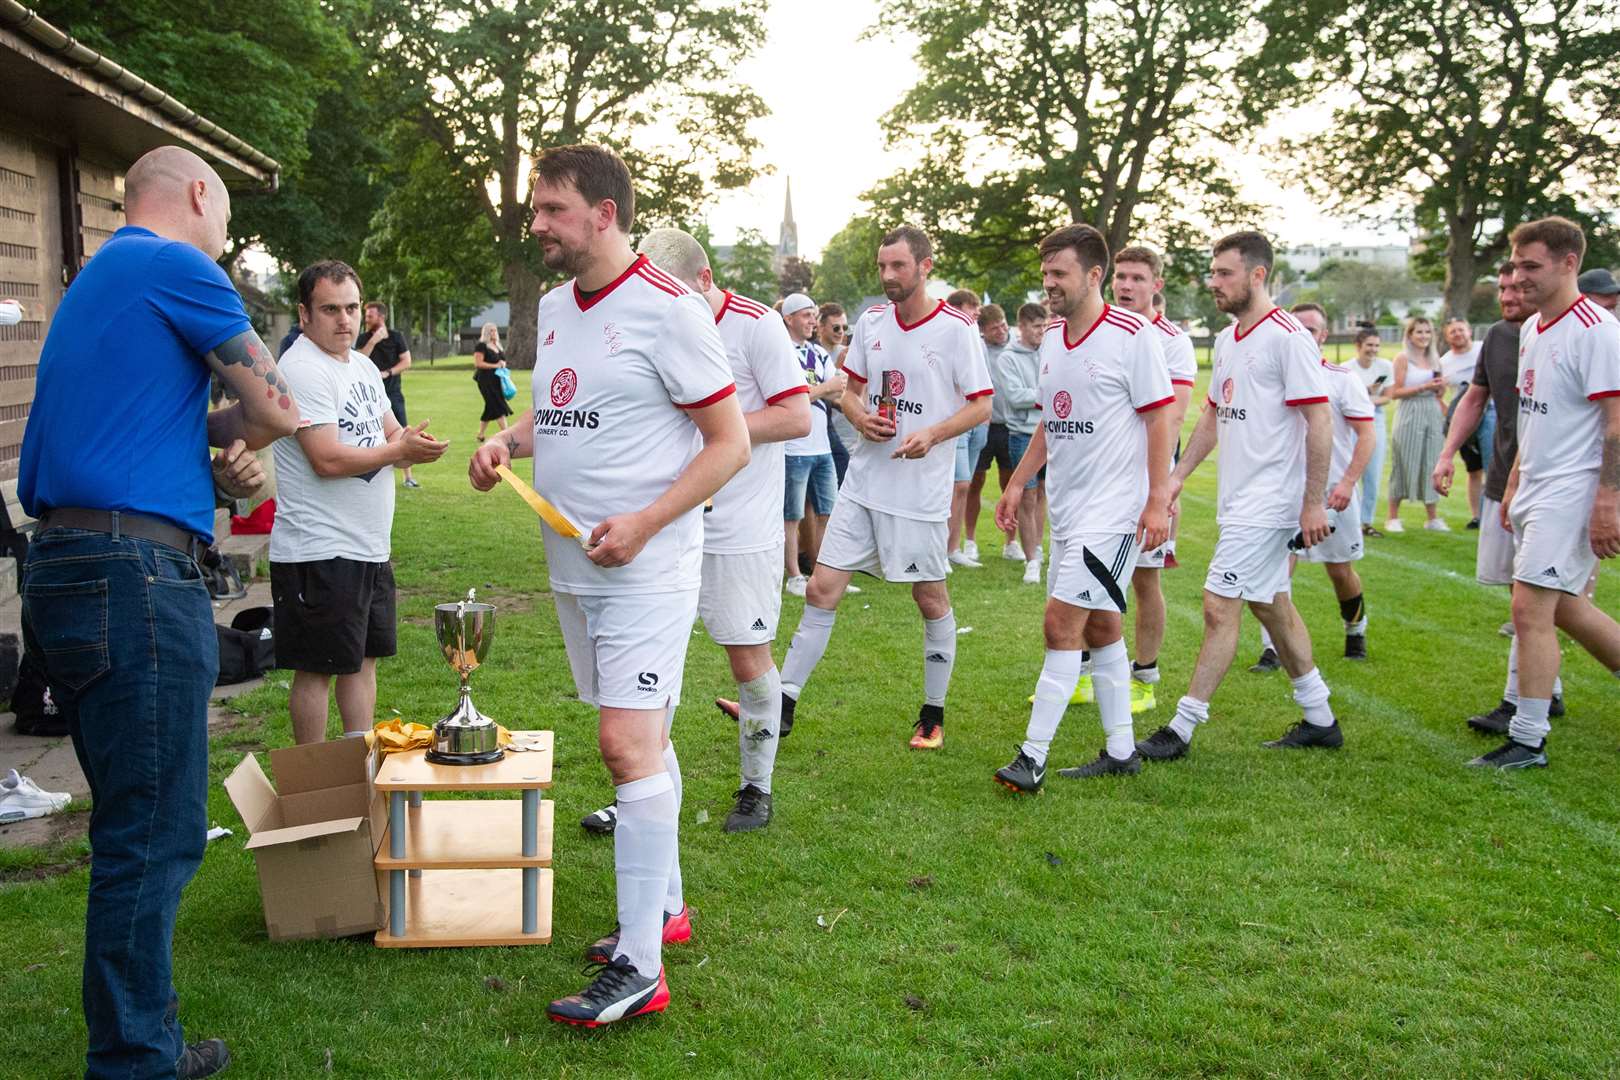 Carisbrooke's Chris Ross leads the celebrations for the Forres side...Carisbrooke FC (1) vs Westerlea FC (0) - Top Car Cup Final - Roysvale, Forres 16/07/2021...Picture: Daniel Forsyth..